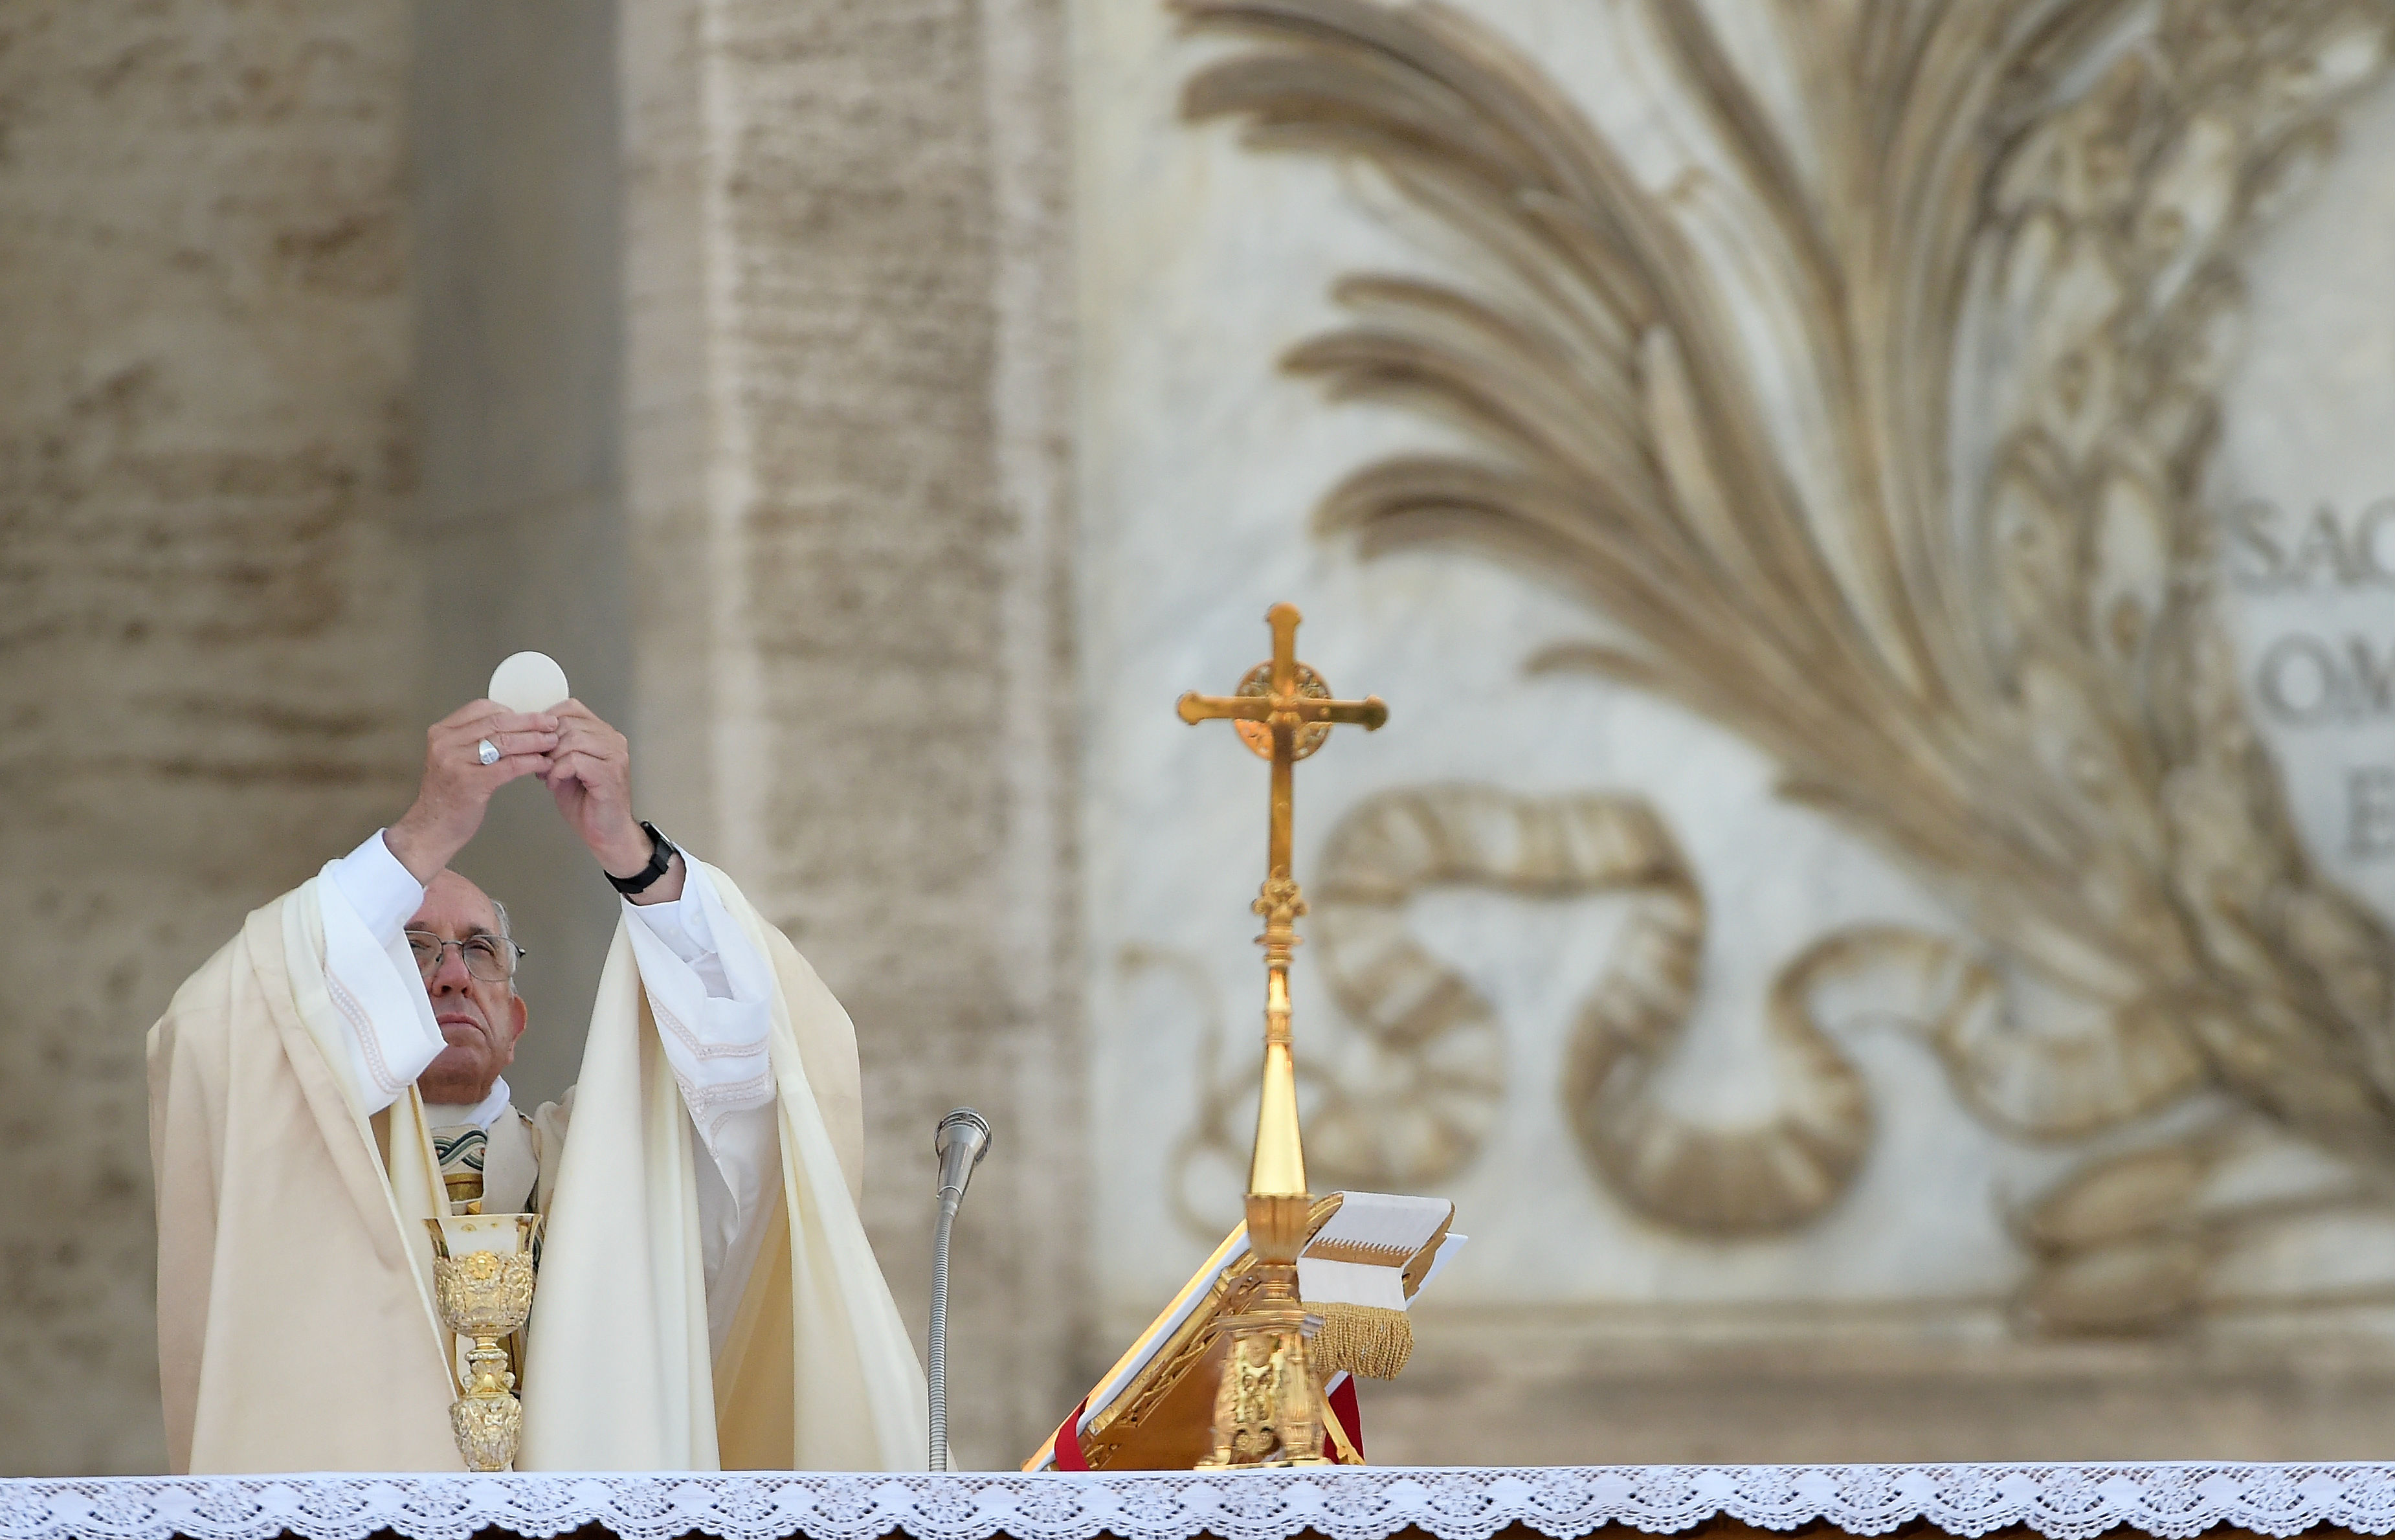 Post-Vatican II liturgical reforms 'irreversible', says Pope